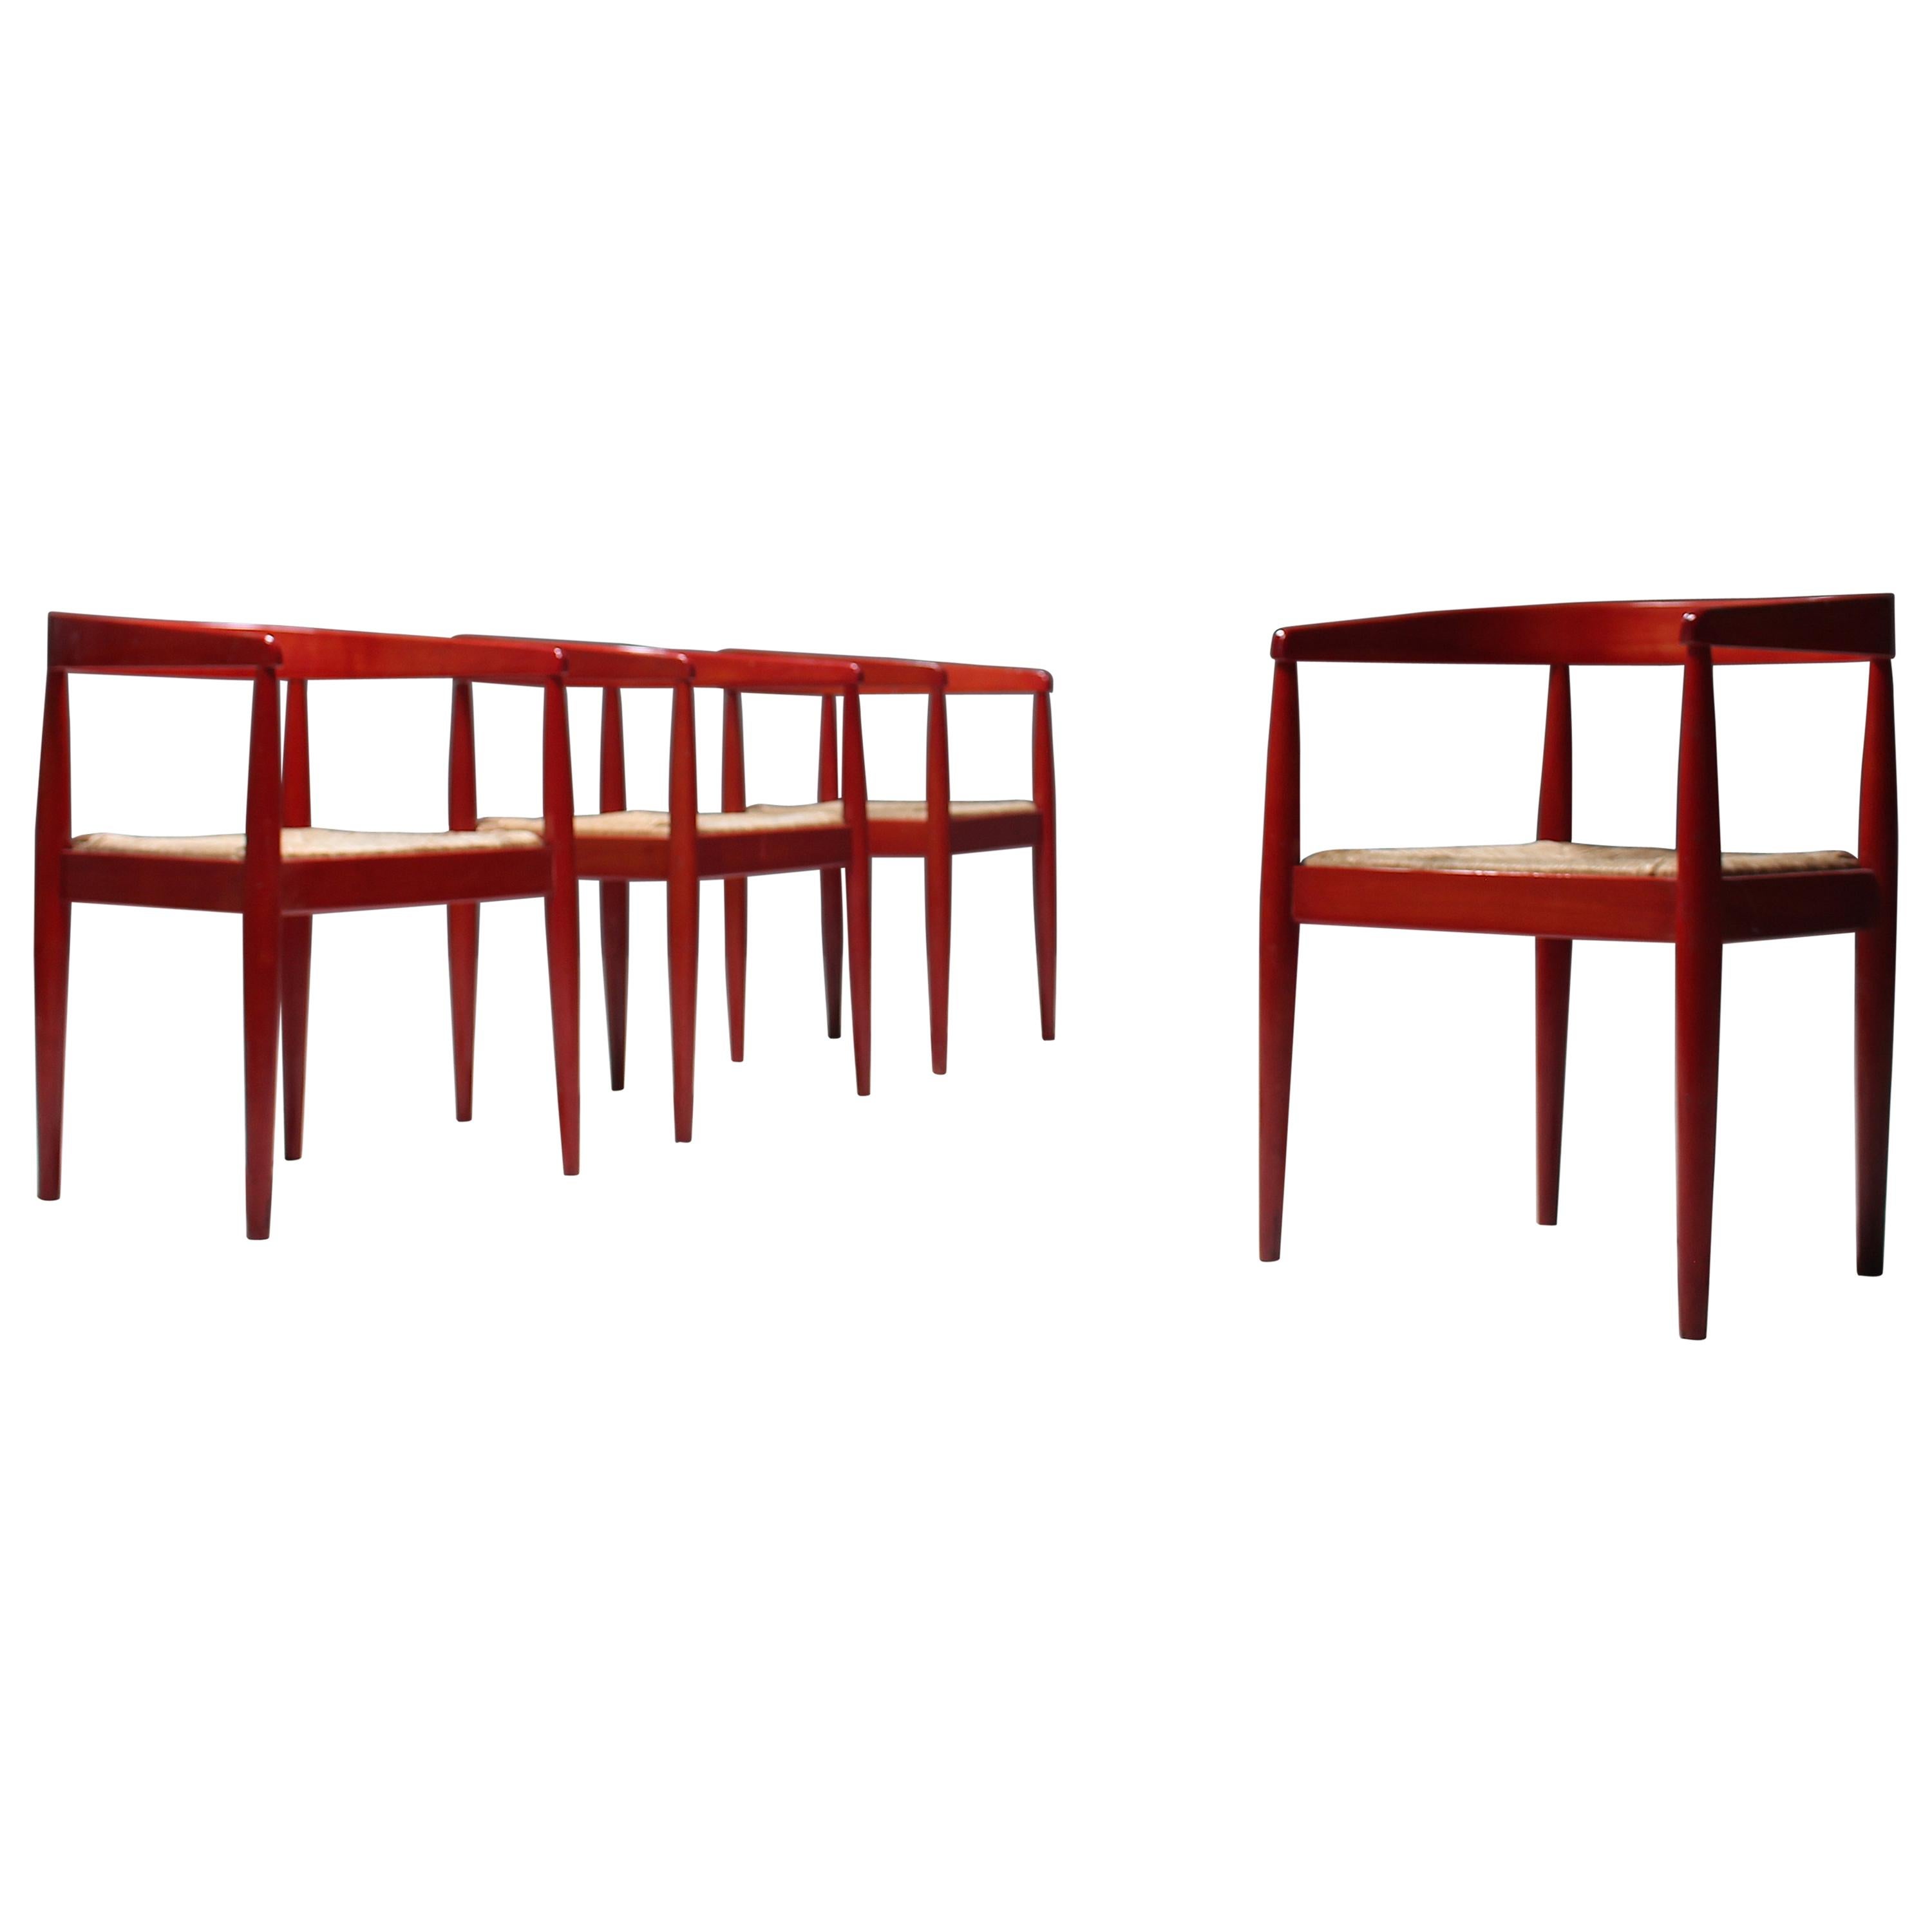 Set of Four Italian Red Glazed Dining Chairs with Rush Seat, 1960s For Sale